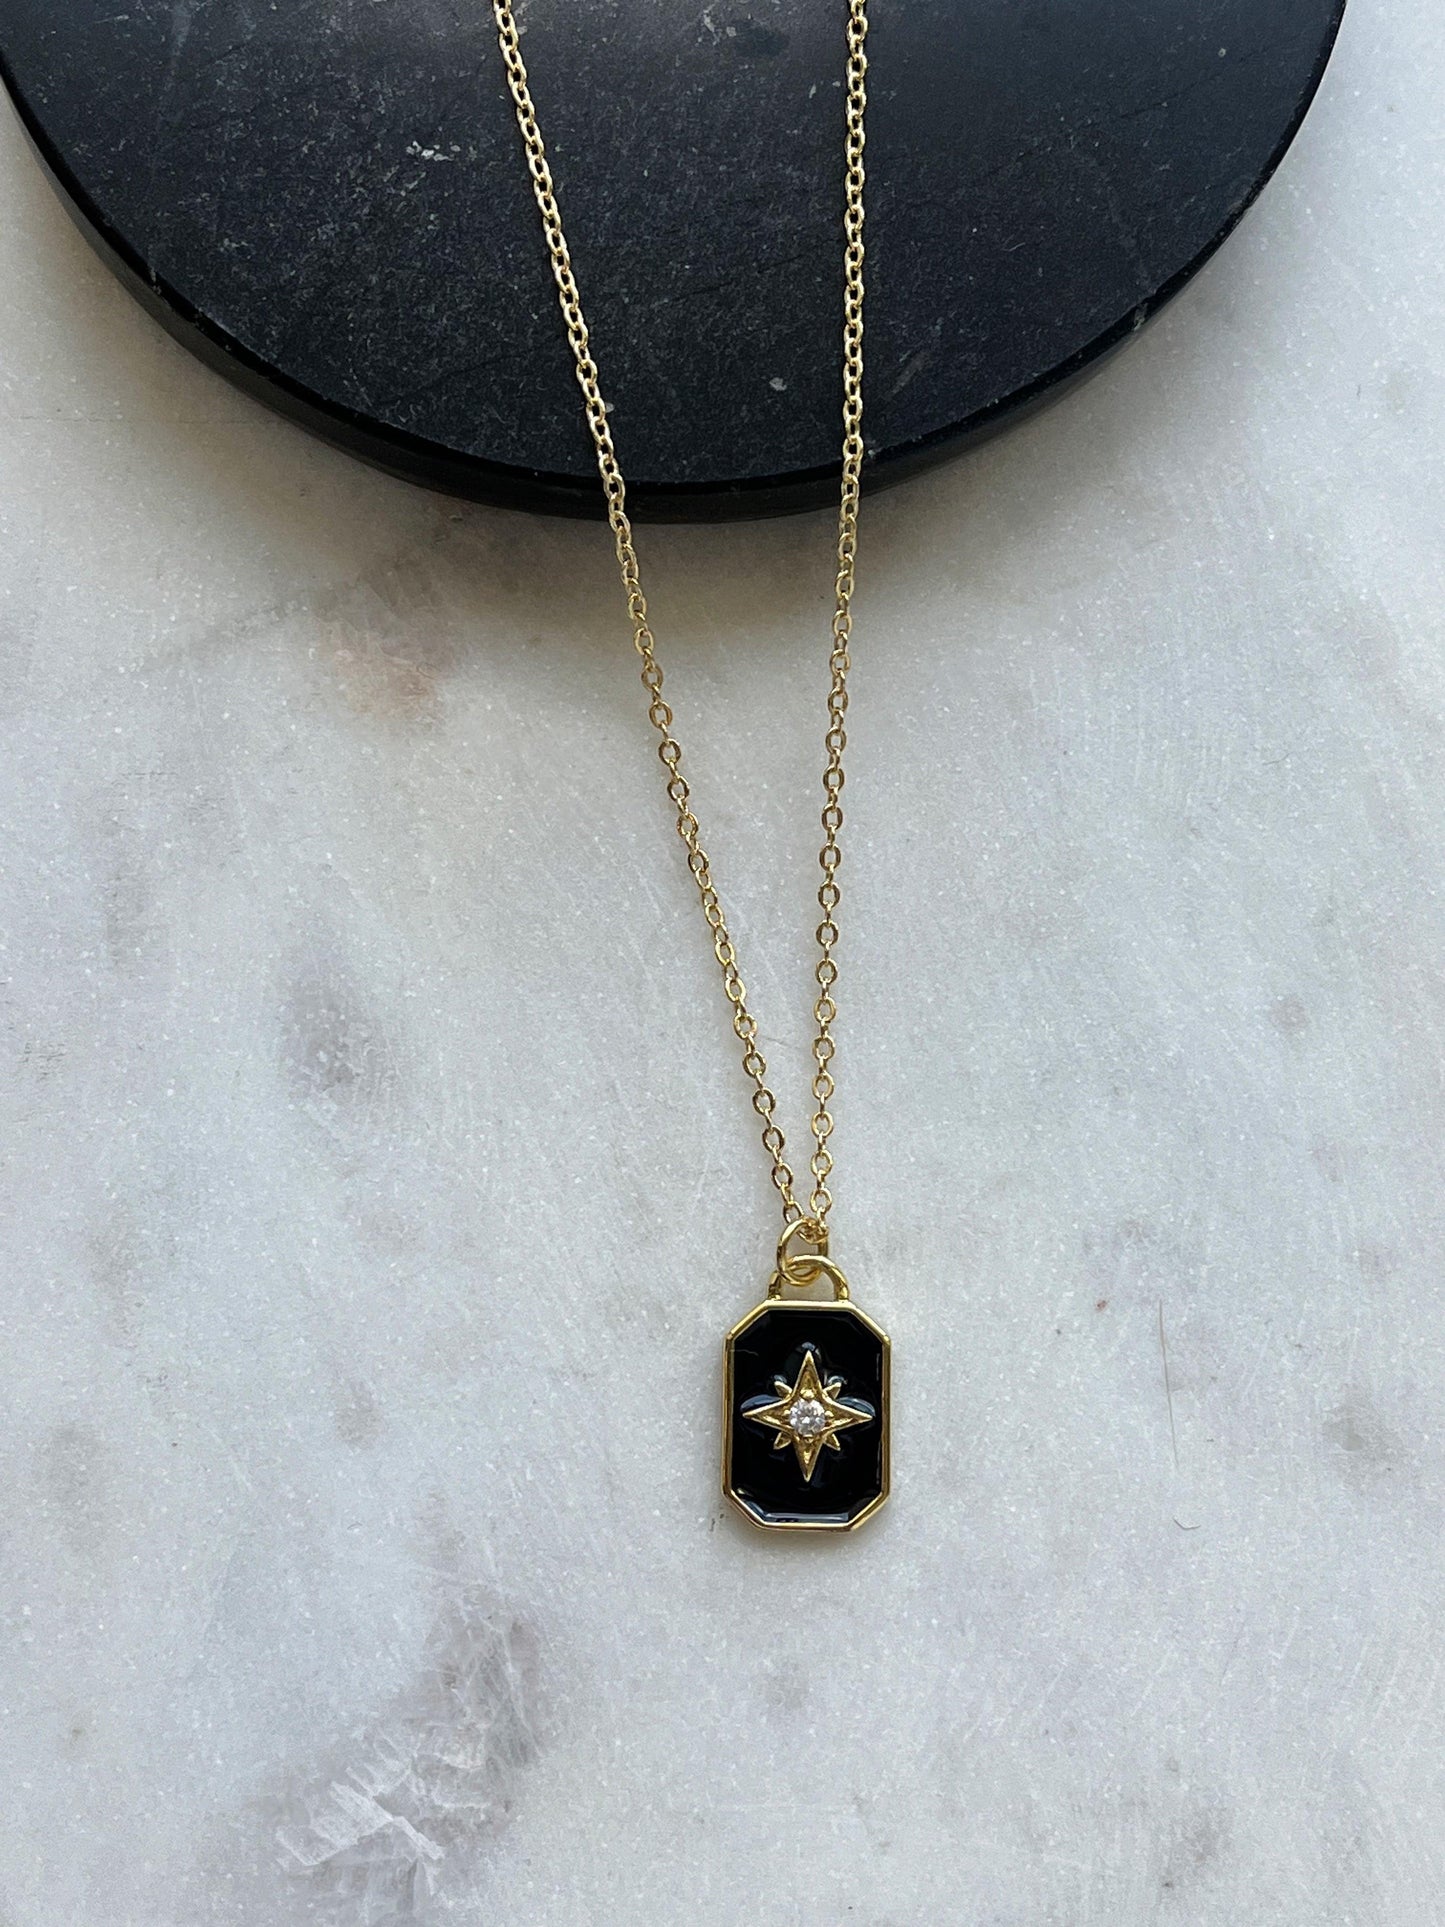 North Star pendant Necklace - Kybalion Jewellery